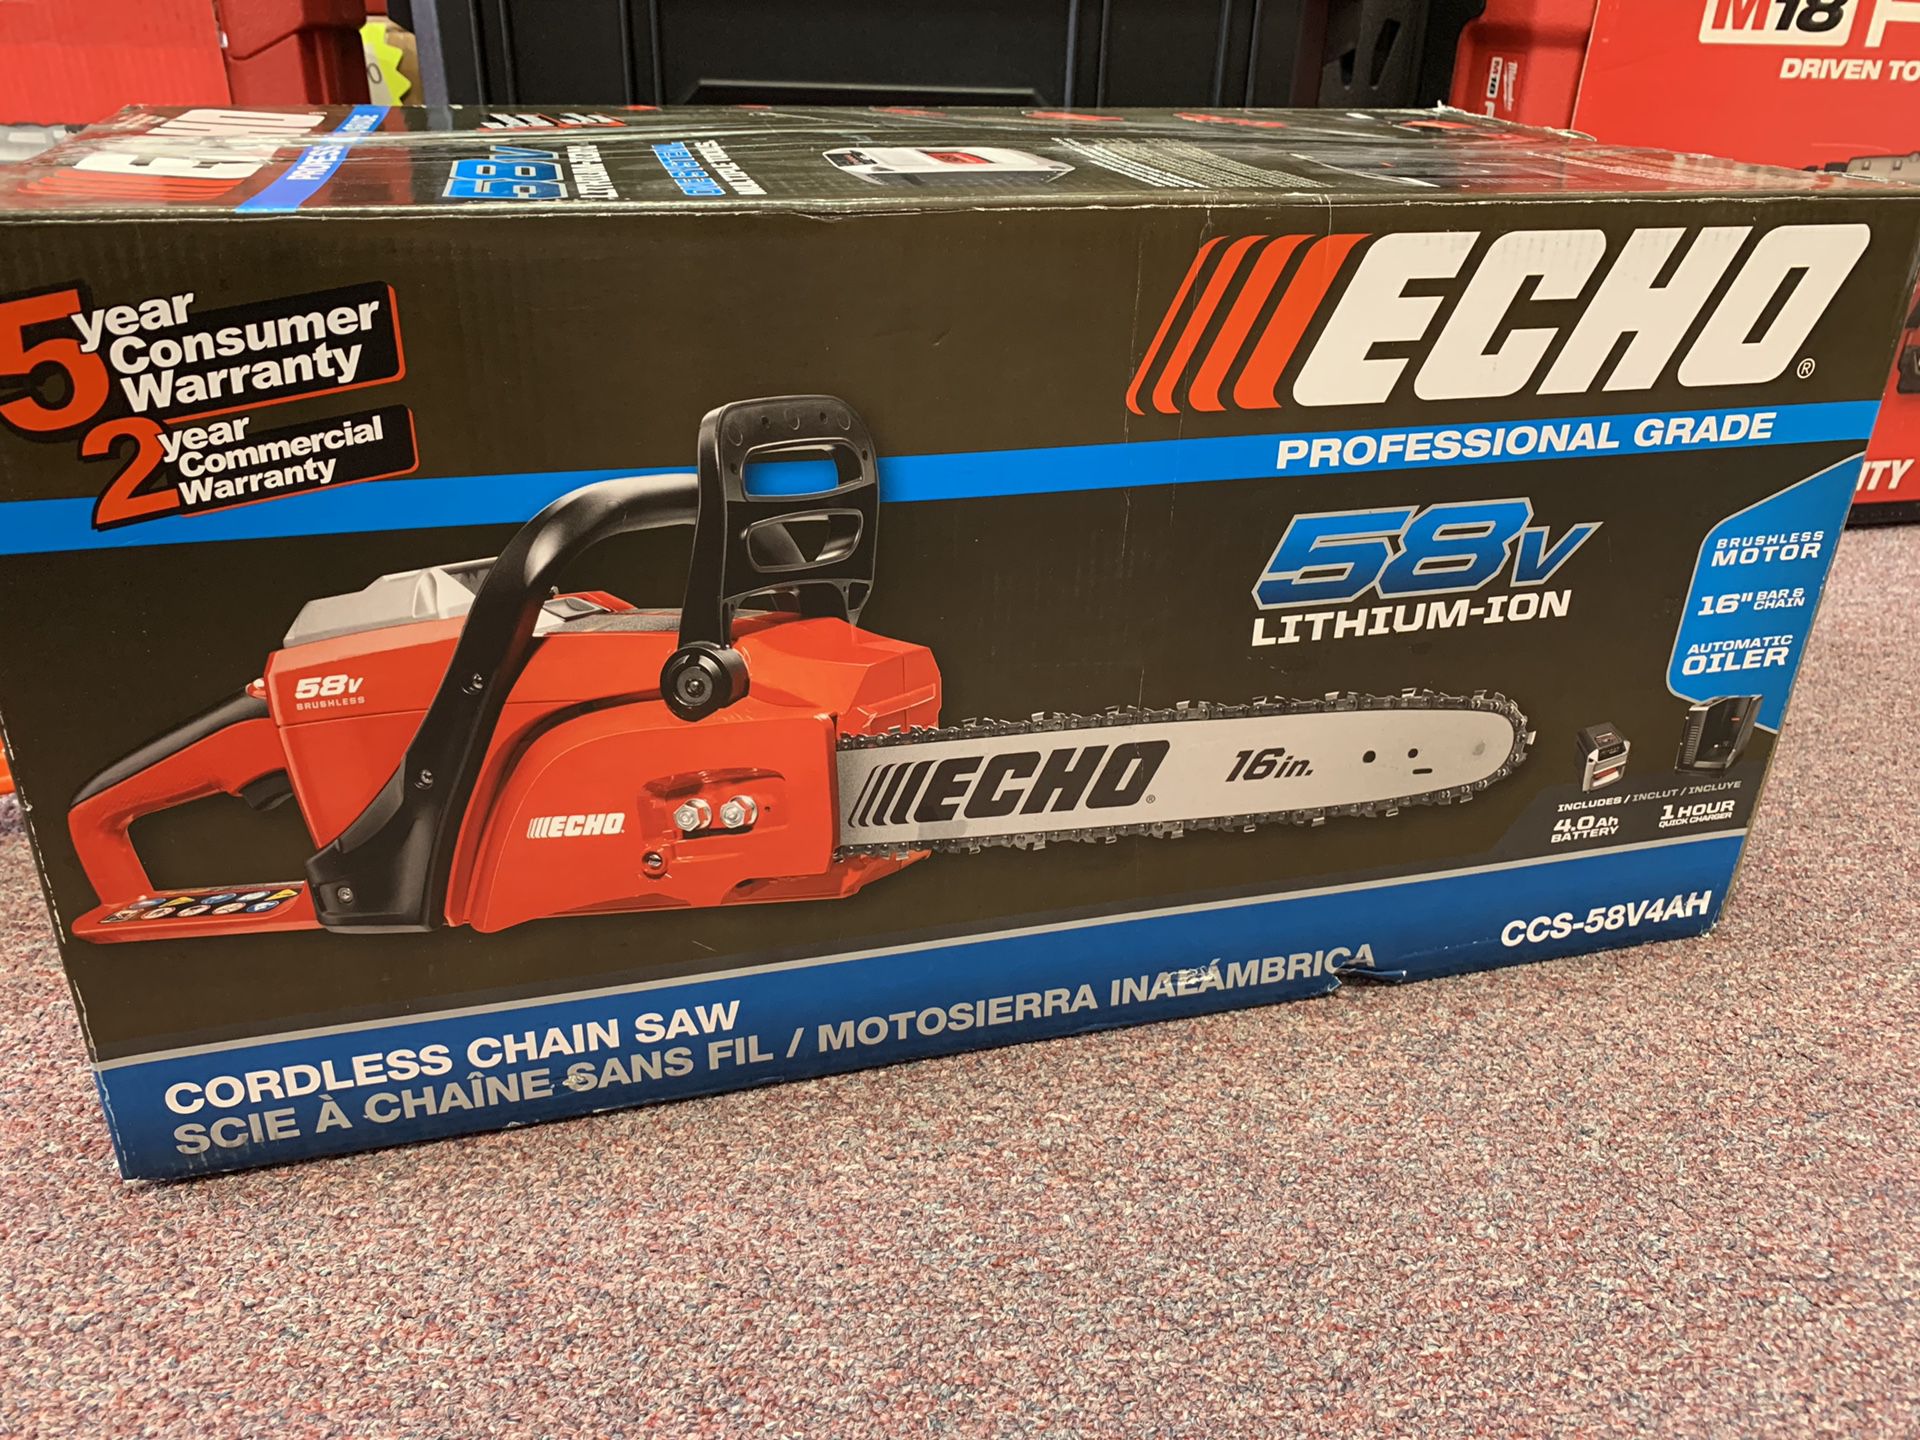 New Echo 58v Battery Chainsaw 16in Kit. CCS58V4AH